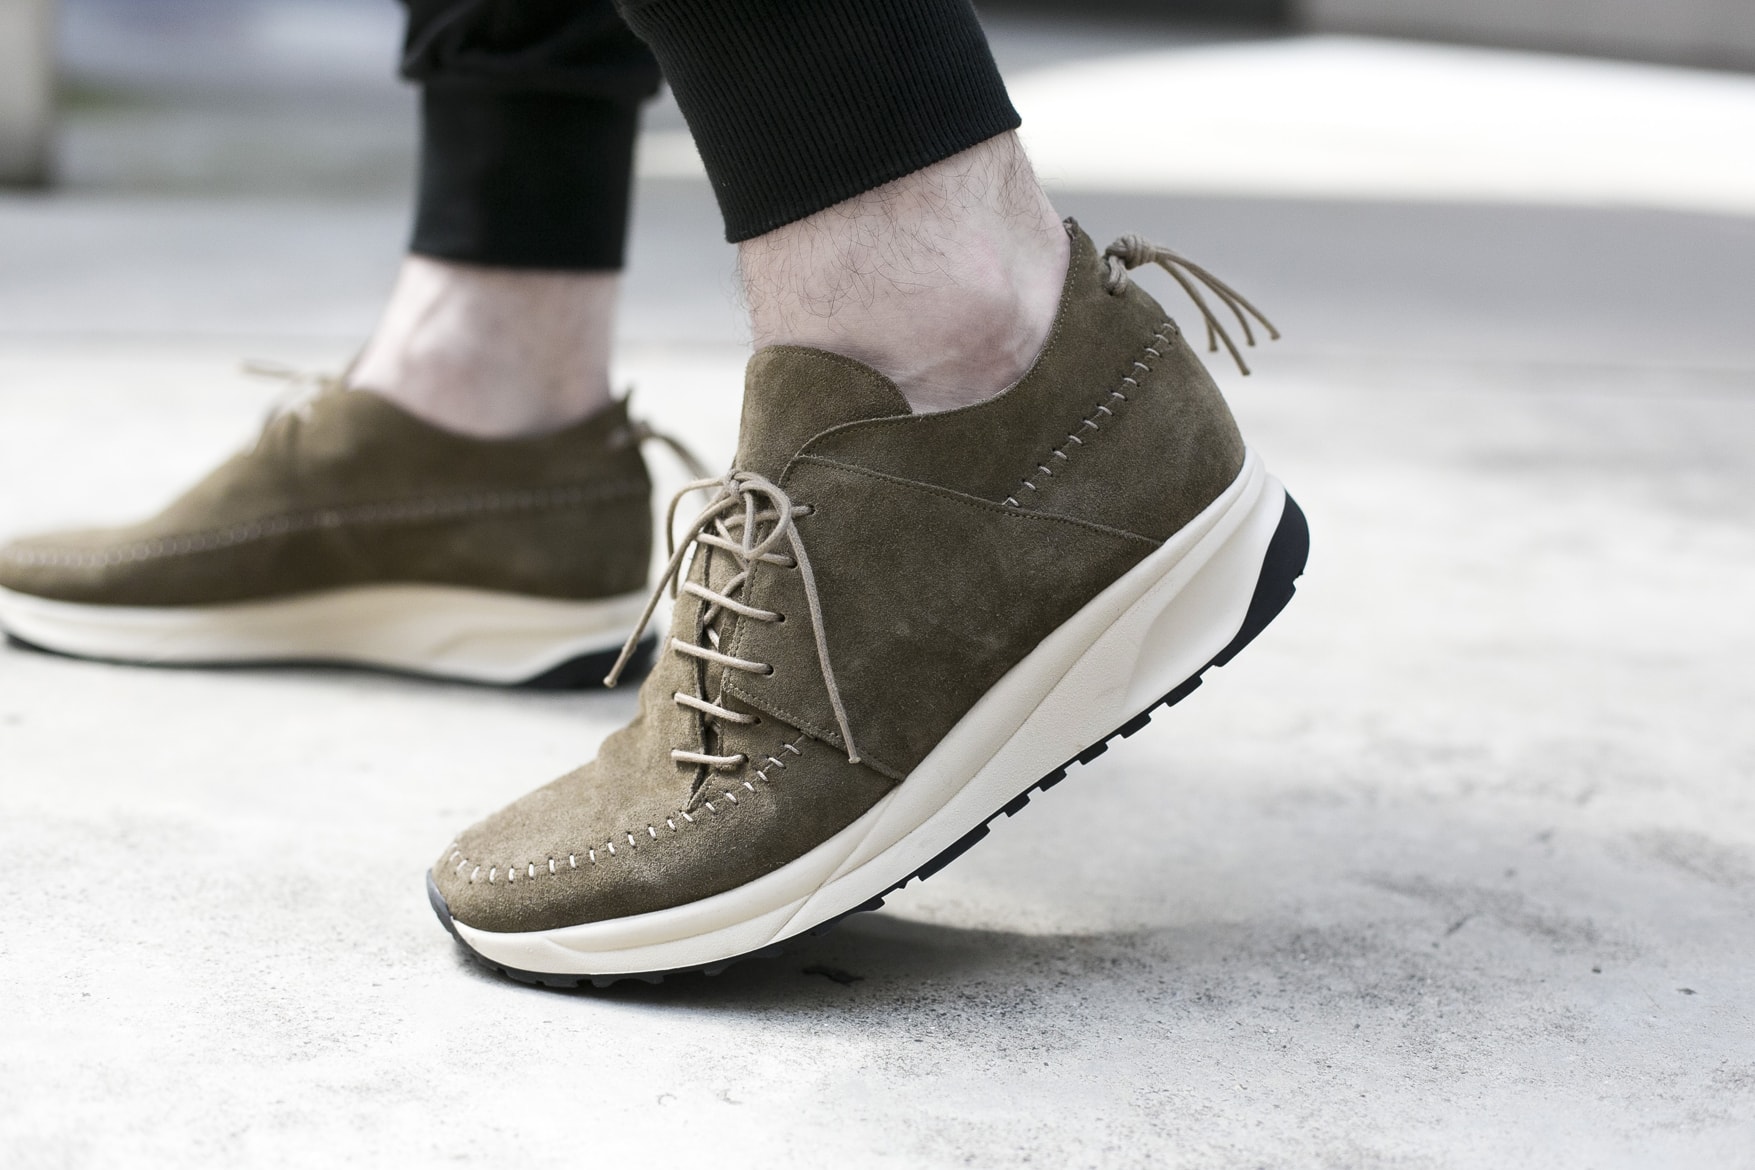 NDG Native Runs 2016 Footwear Collection olive brown sand suede moccasin hand stitched